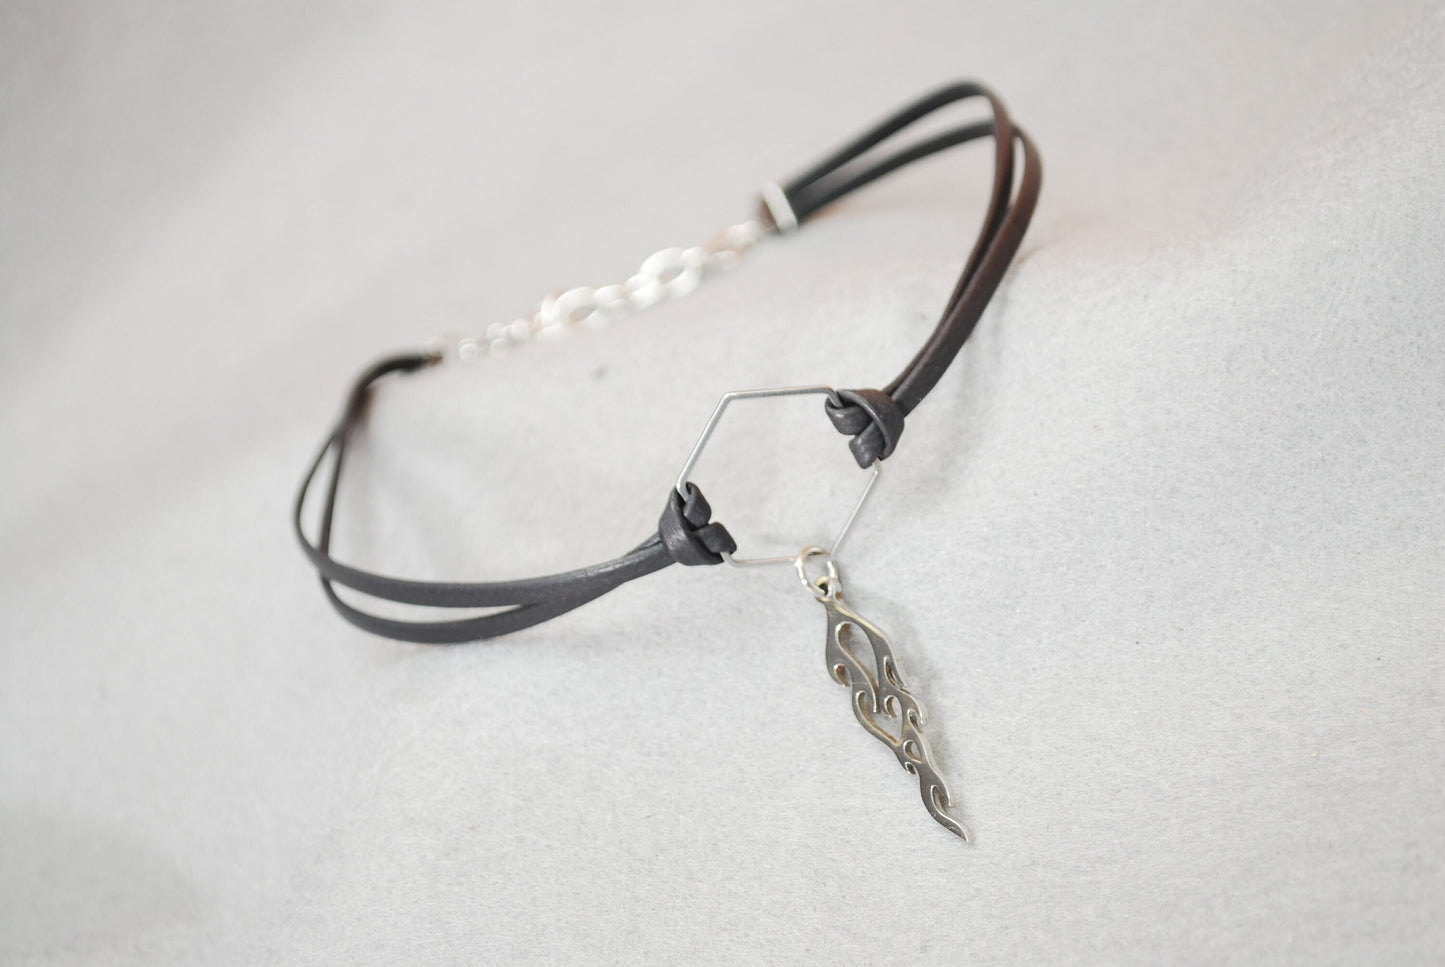 Dark Grey Leather Choker 13 Inches: Stylish Stainless Steel Flame Pendant, Sensual Fashion Accessory for Bold Nights, Unique Jewelry Gift